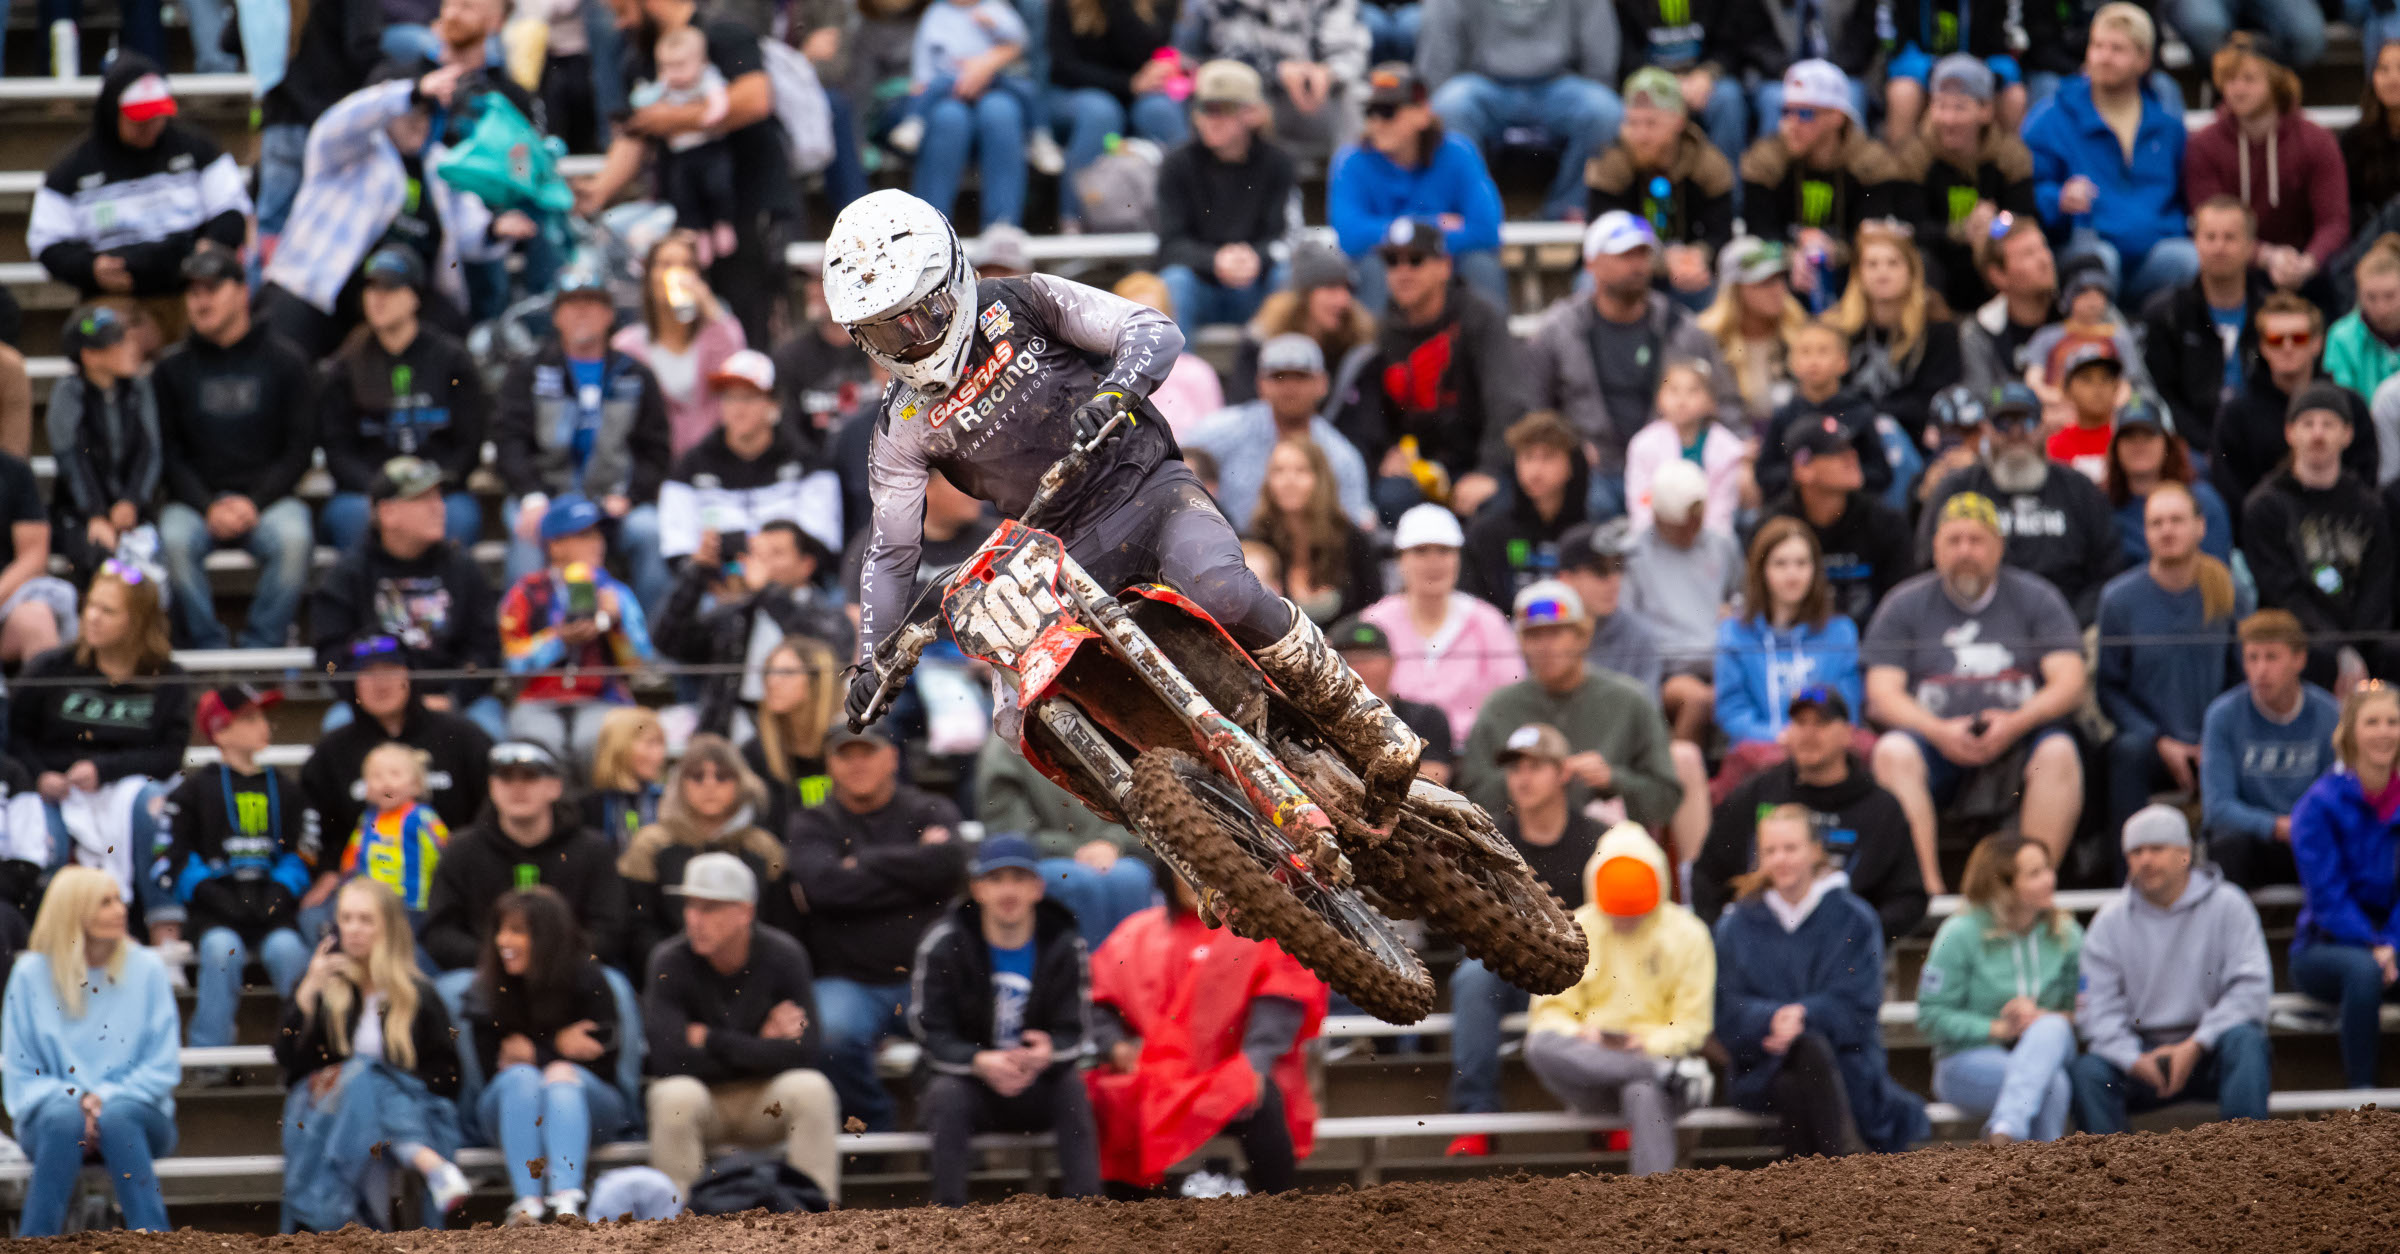 Mark Fineis (105) earned second in the Supercross Futures finale that took place within the 2023 Utah Supercross event inside Rice-Eccles Stadium. Photo Credit: Feld Motor Sports, Inc.   